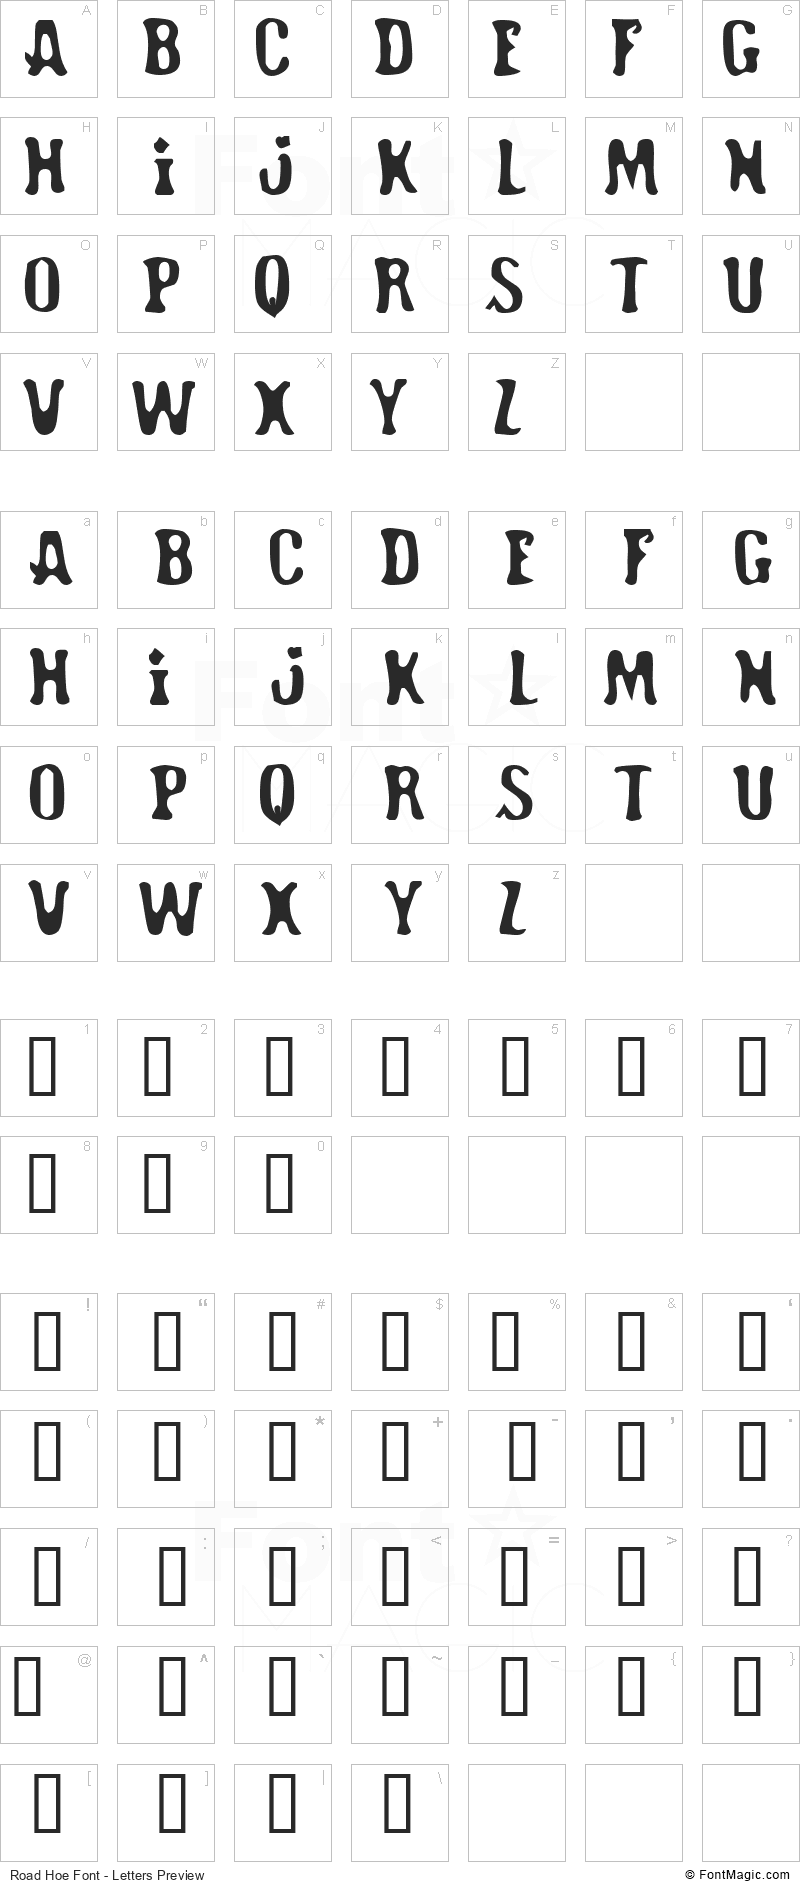 Road Hoe Font - All Latters Preview Chart